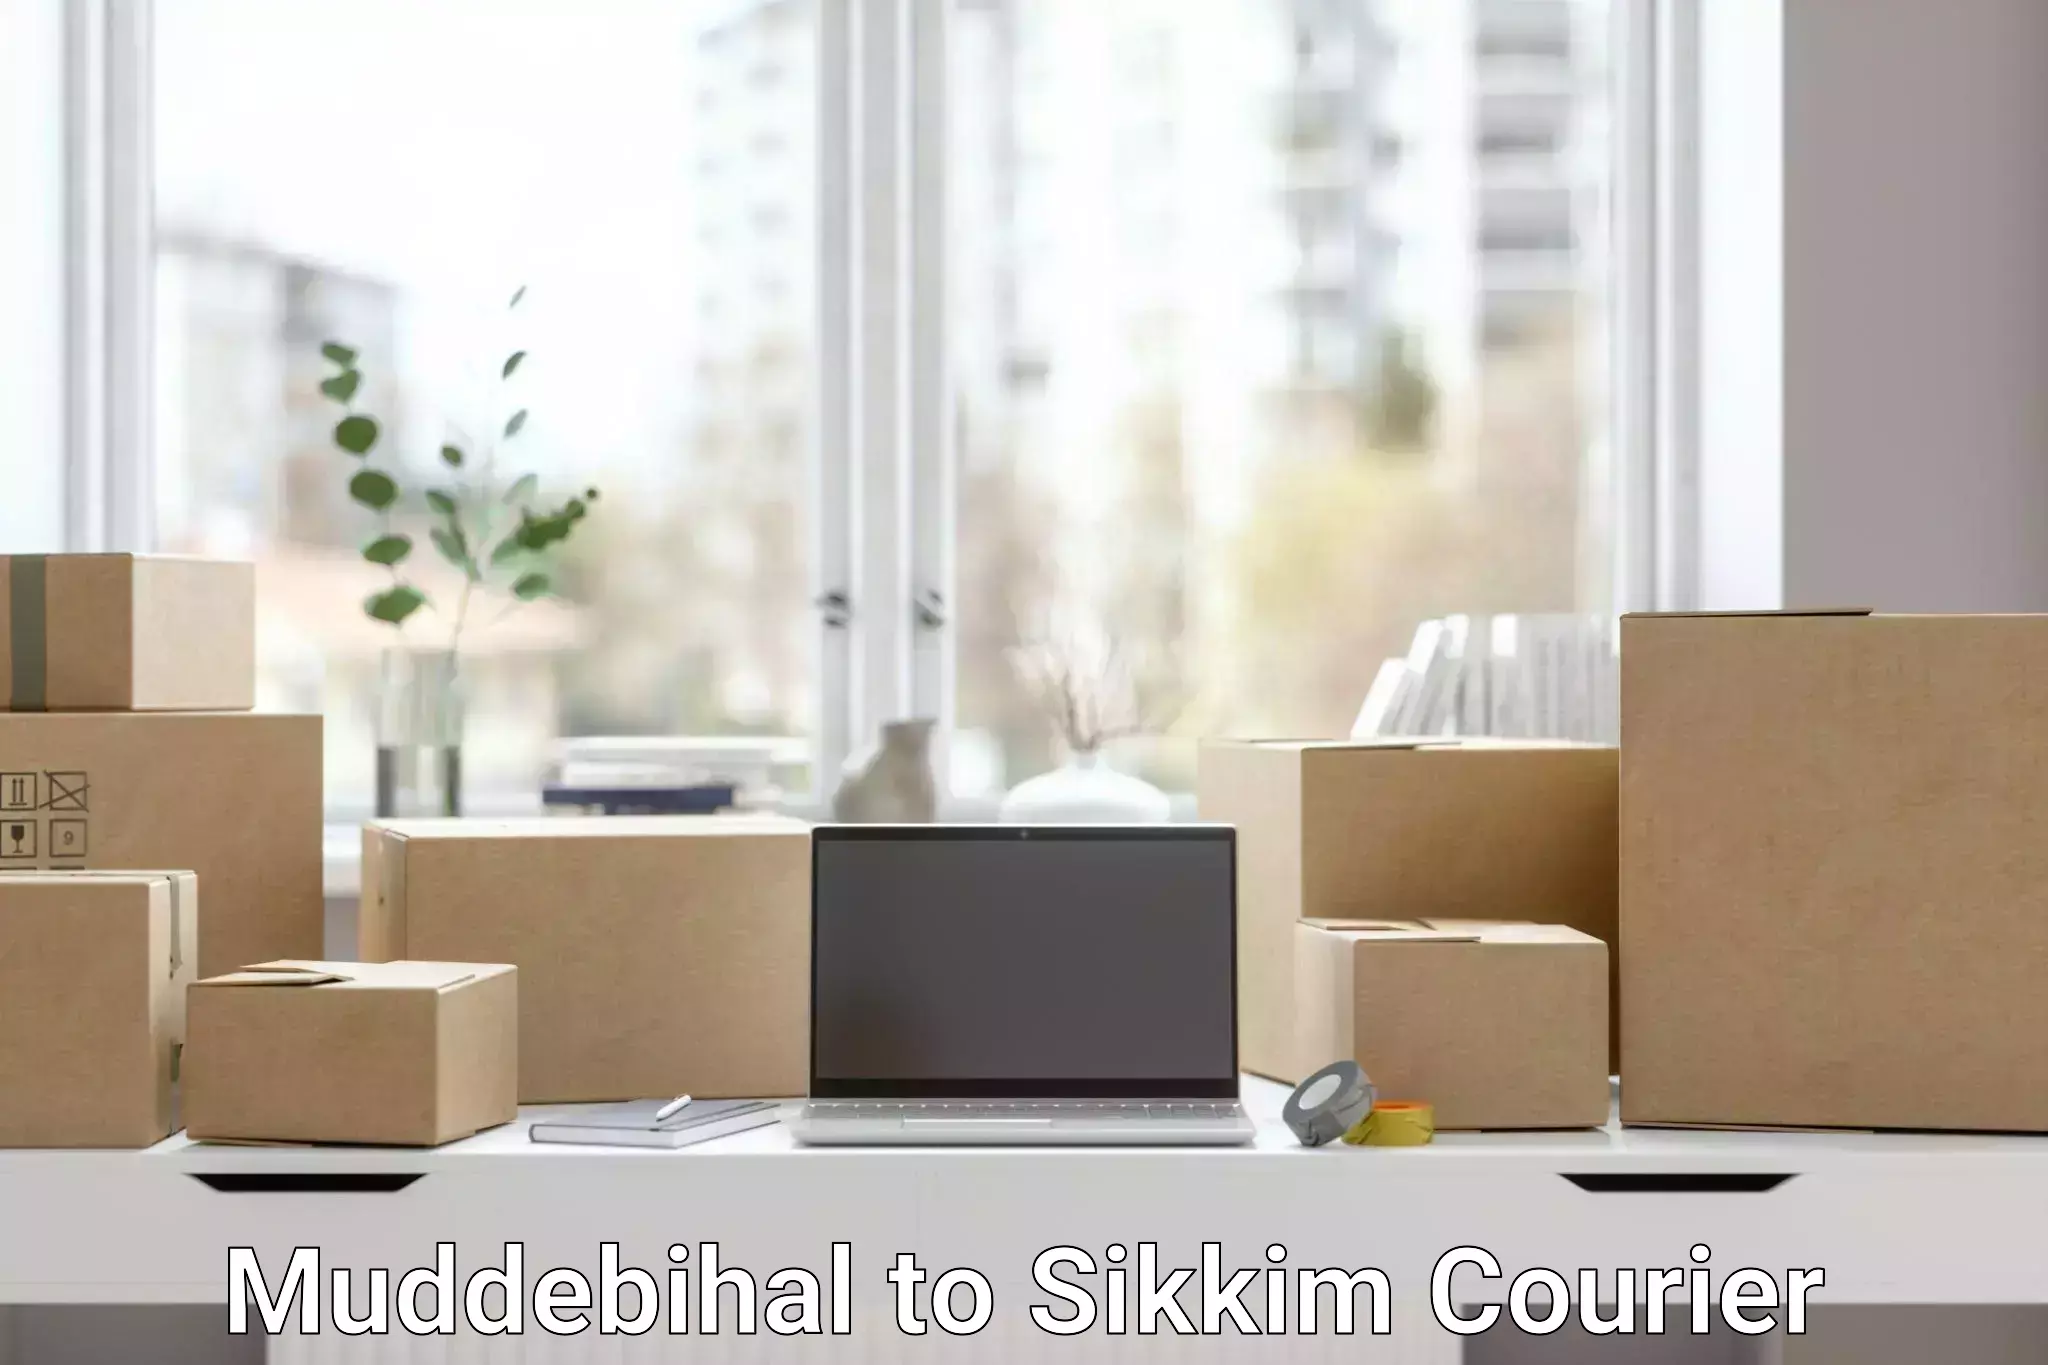 Comprehensive shipping network Muddebihal to East Sikkim